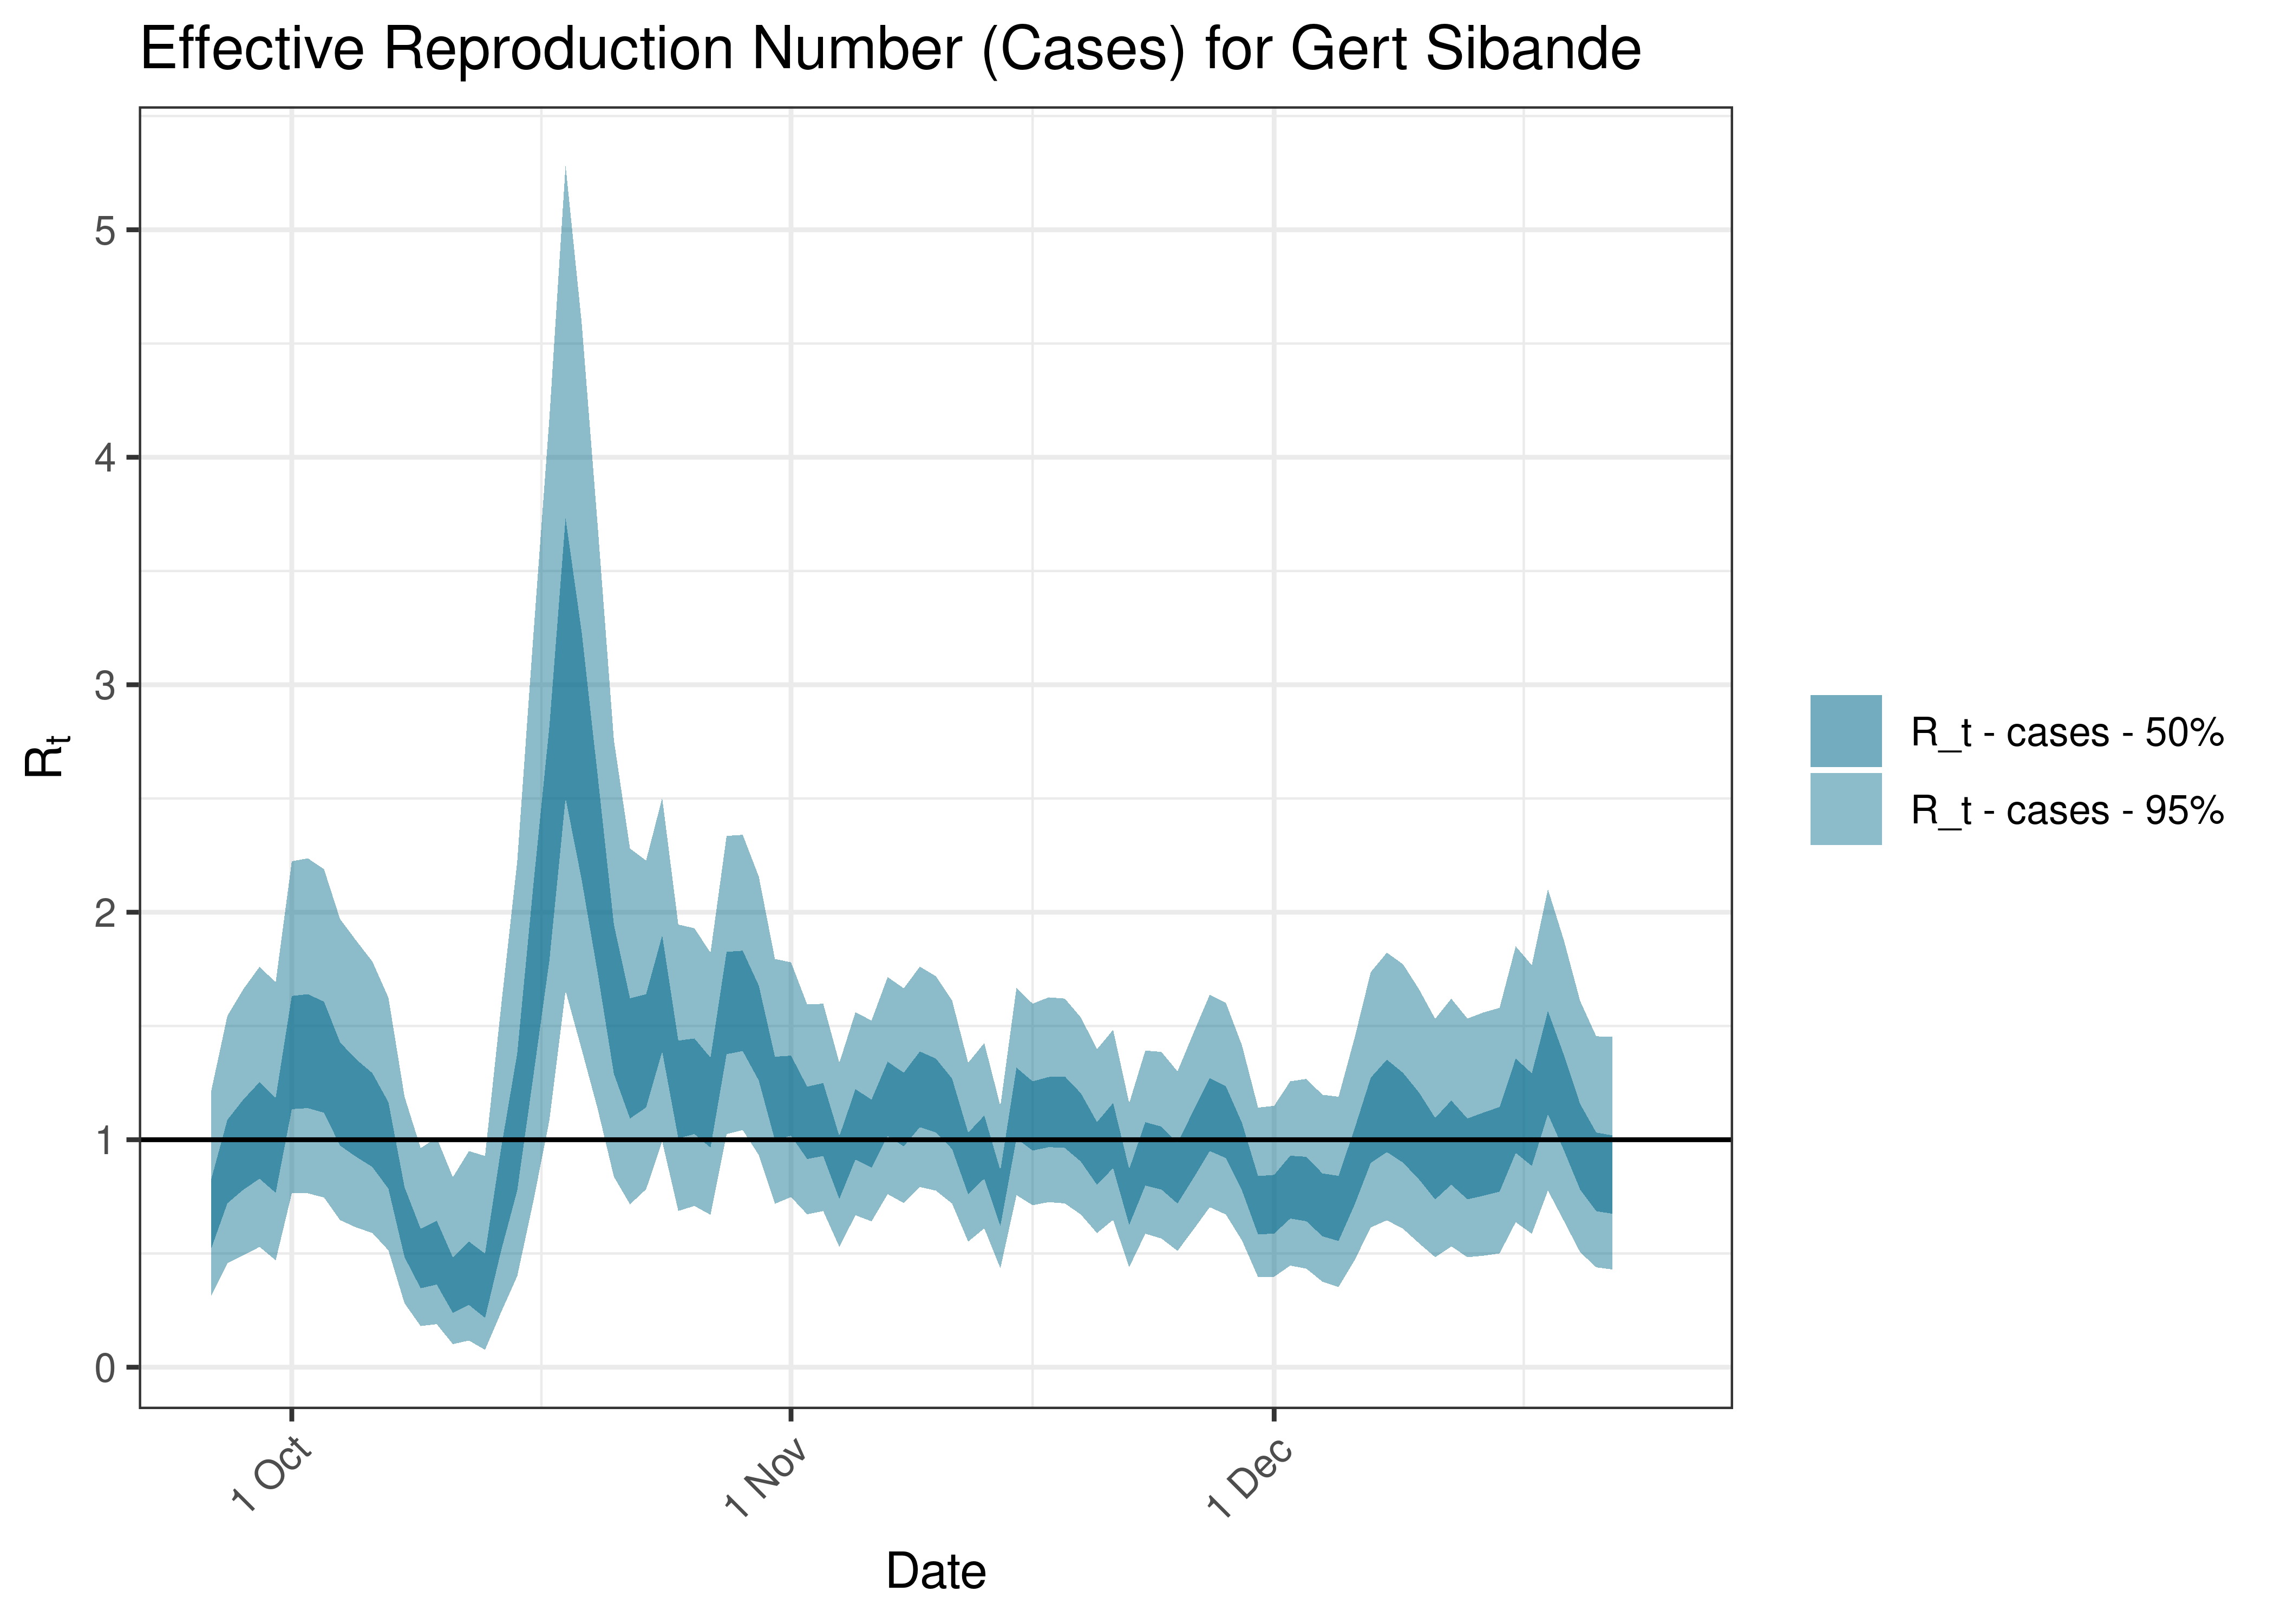 Estimated Effective Reproduction Number Based on Cases for Gert Sibande over last 90 days